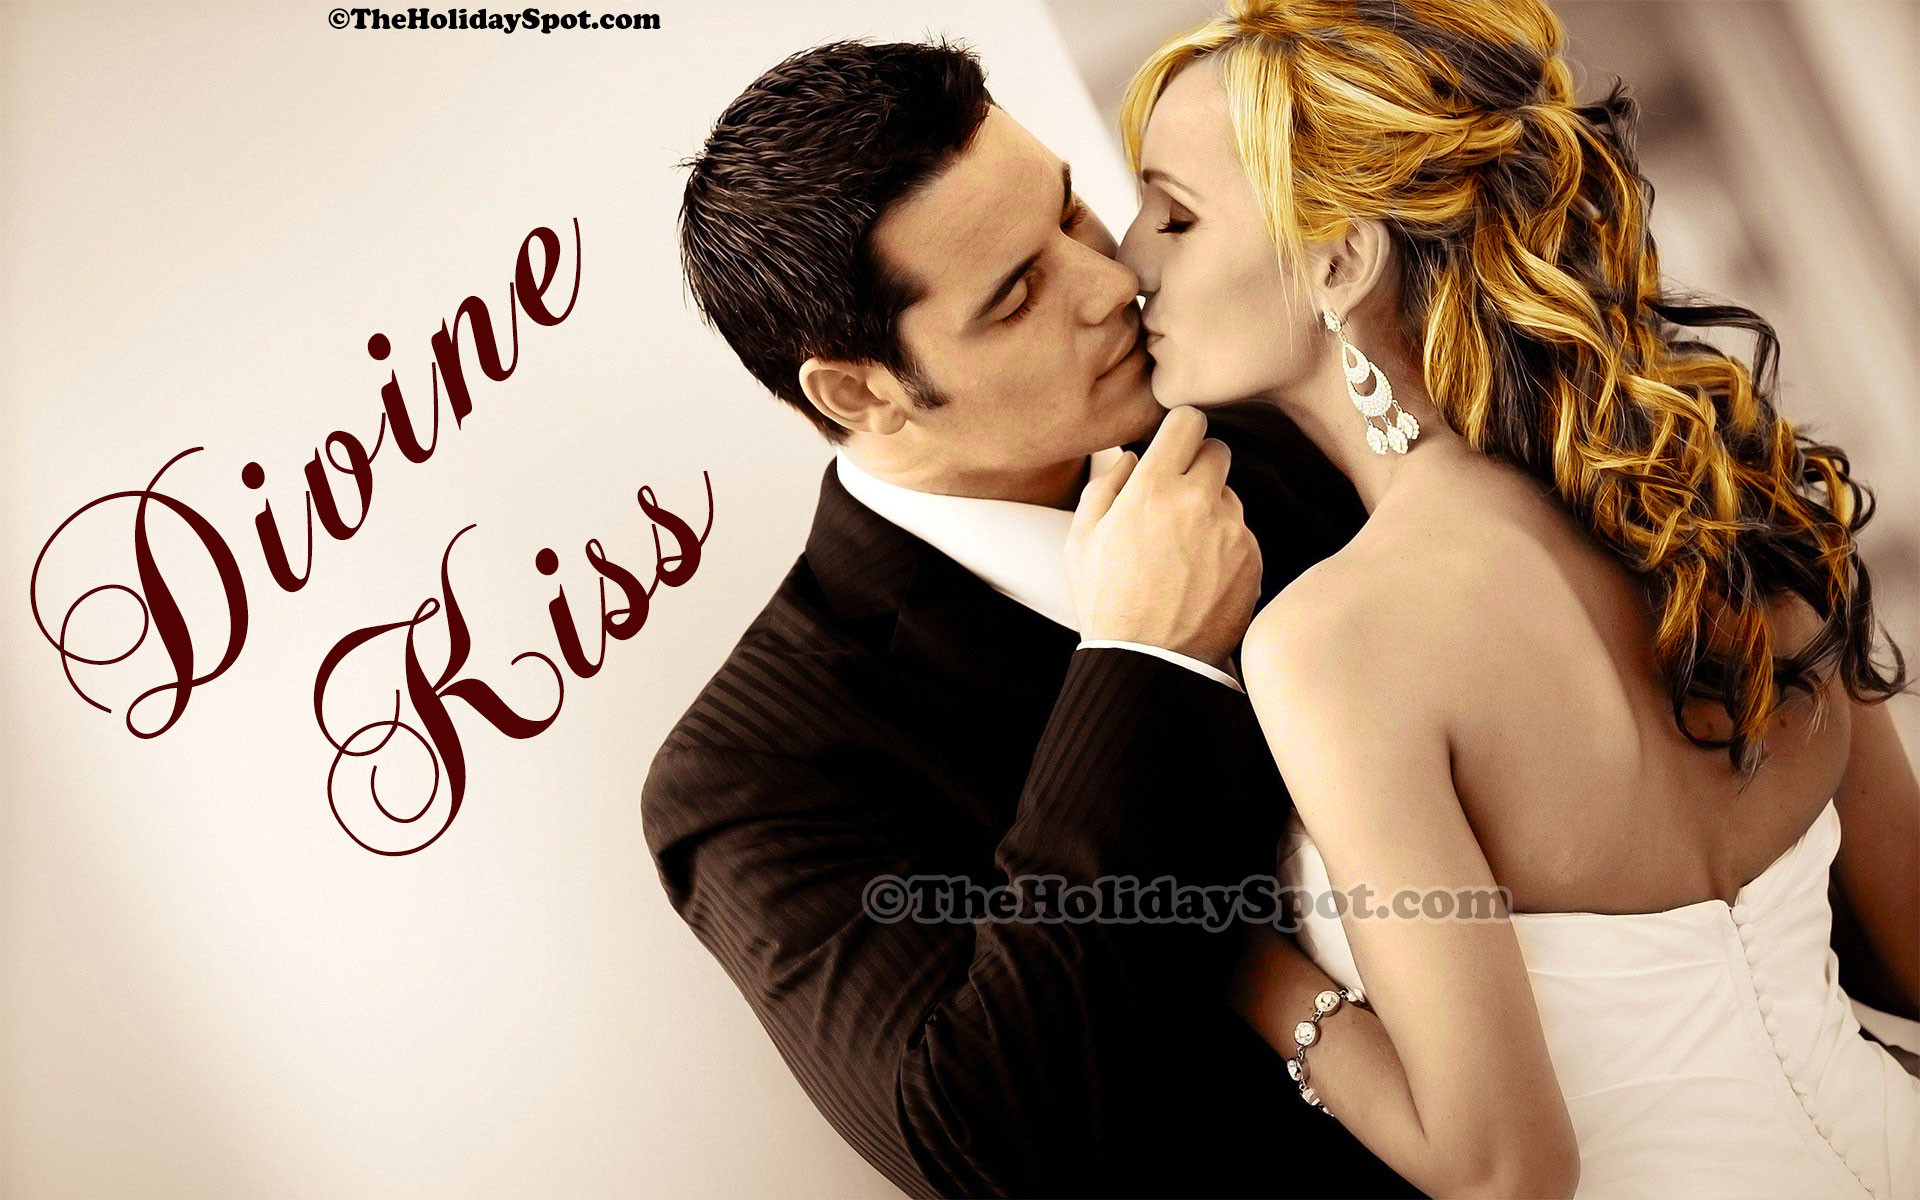 1920x1200 HD Valentine wallpaper of couple kissing each other